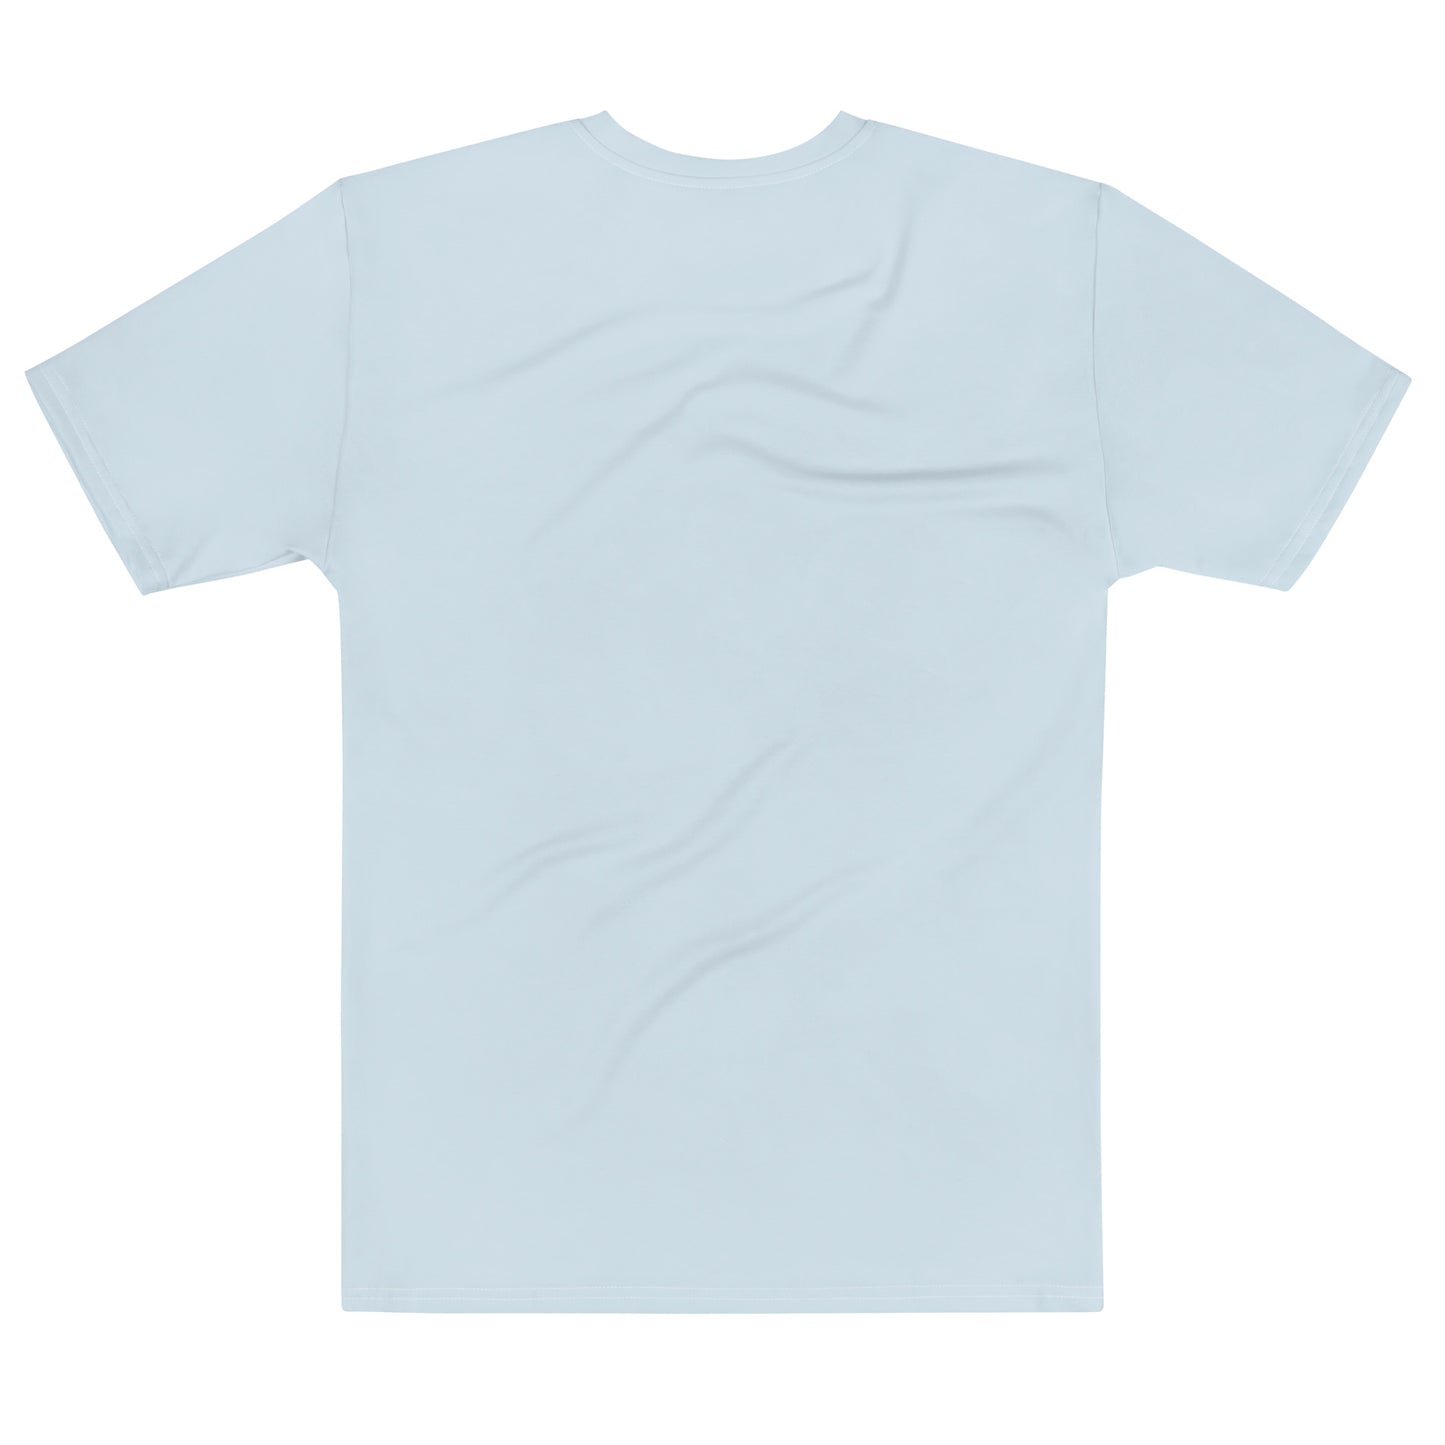 Baby Blue Climate Change Global Warming Statement - Sustainably Made Men's Short Sleeve Tee